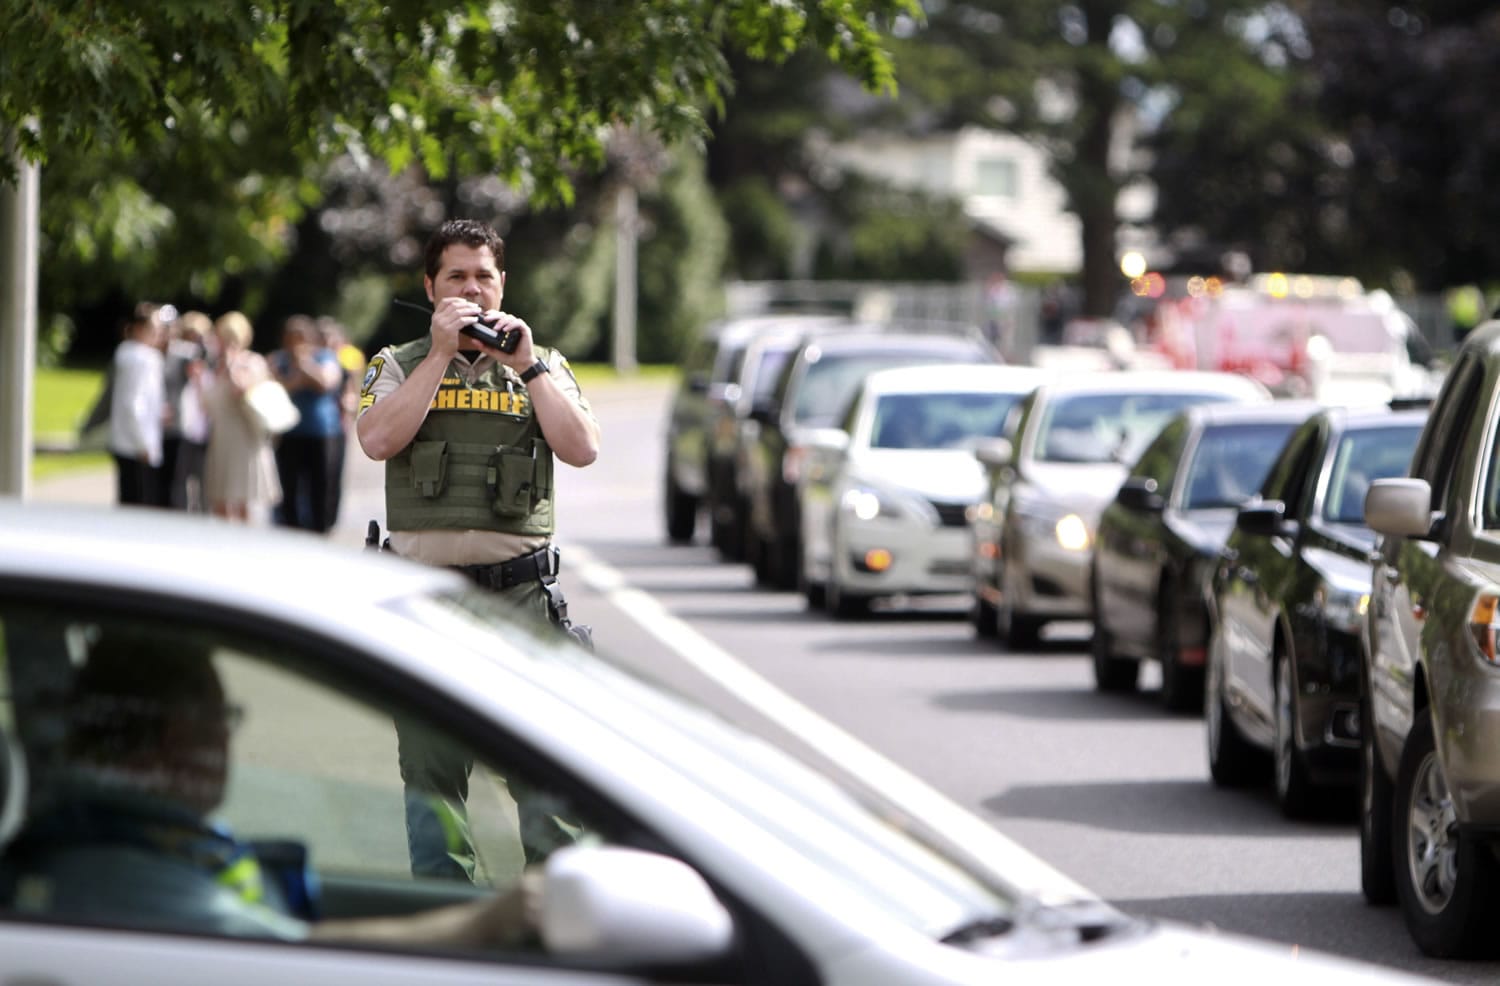 A sheriff's deputy speaks on his radio after a shooting at Reynolds High School on Tuesday, in Troutdale, Ore.